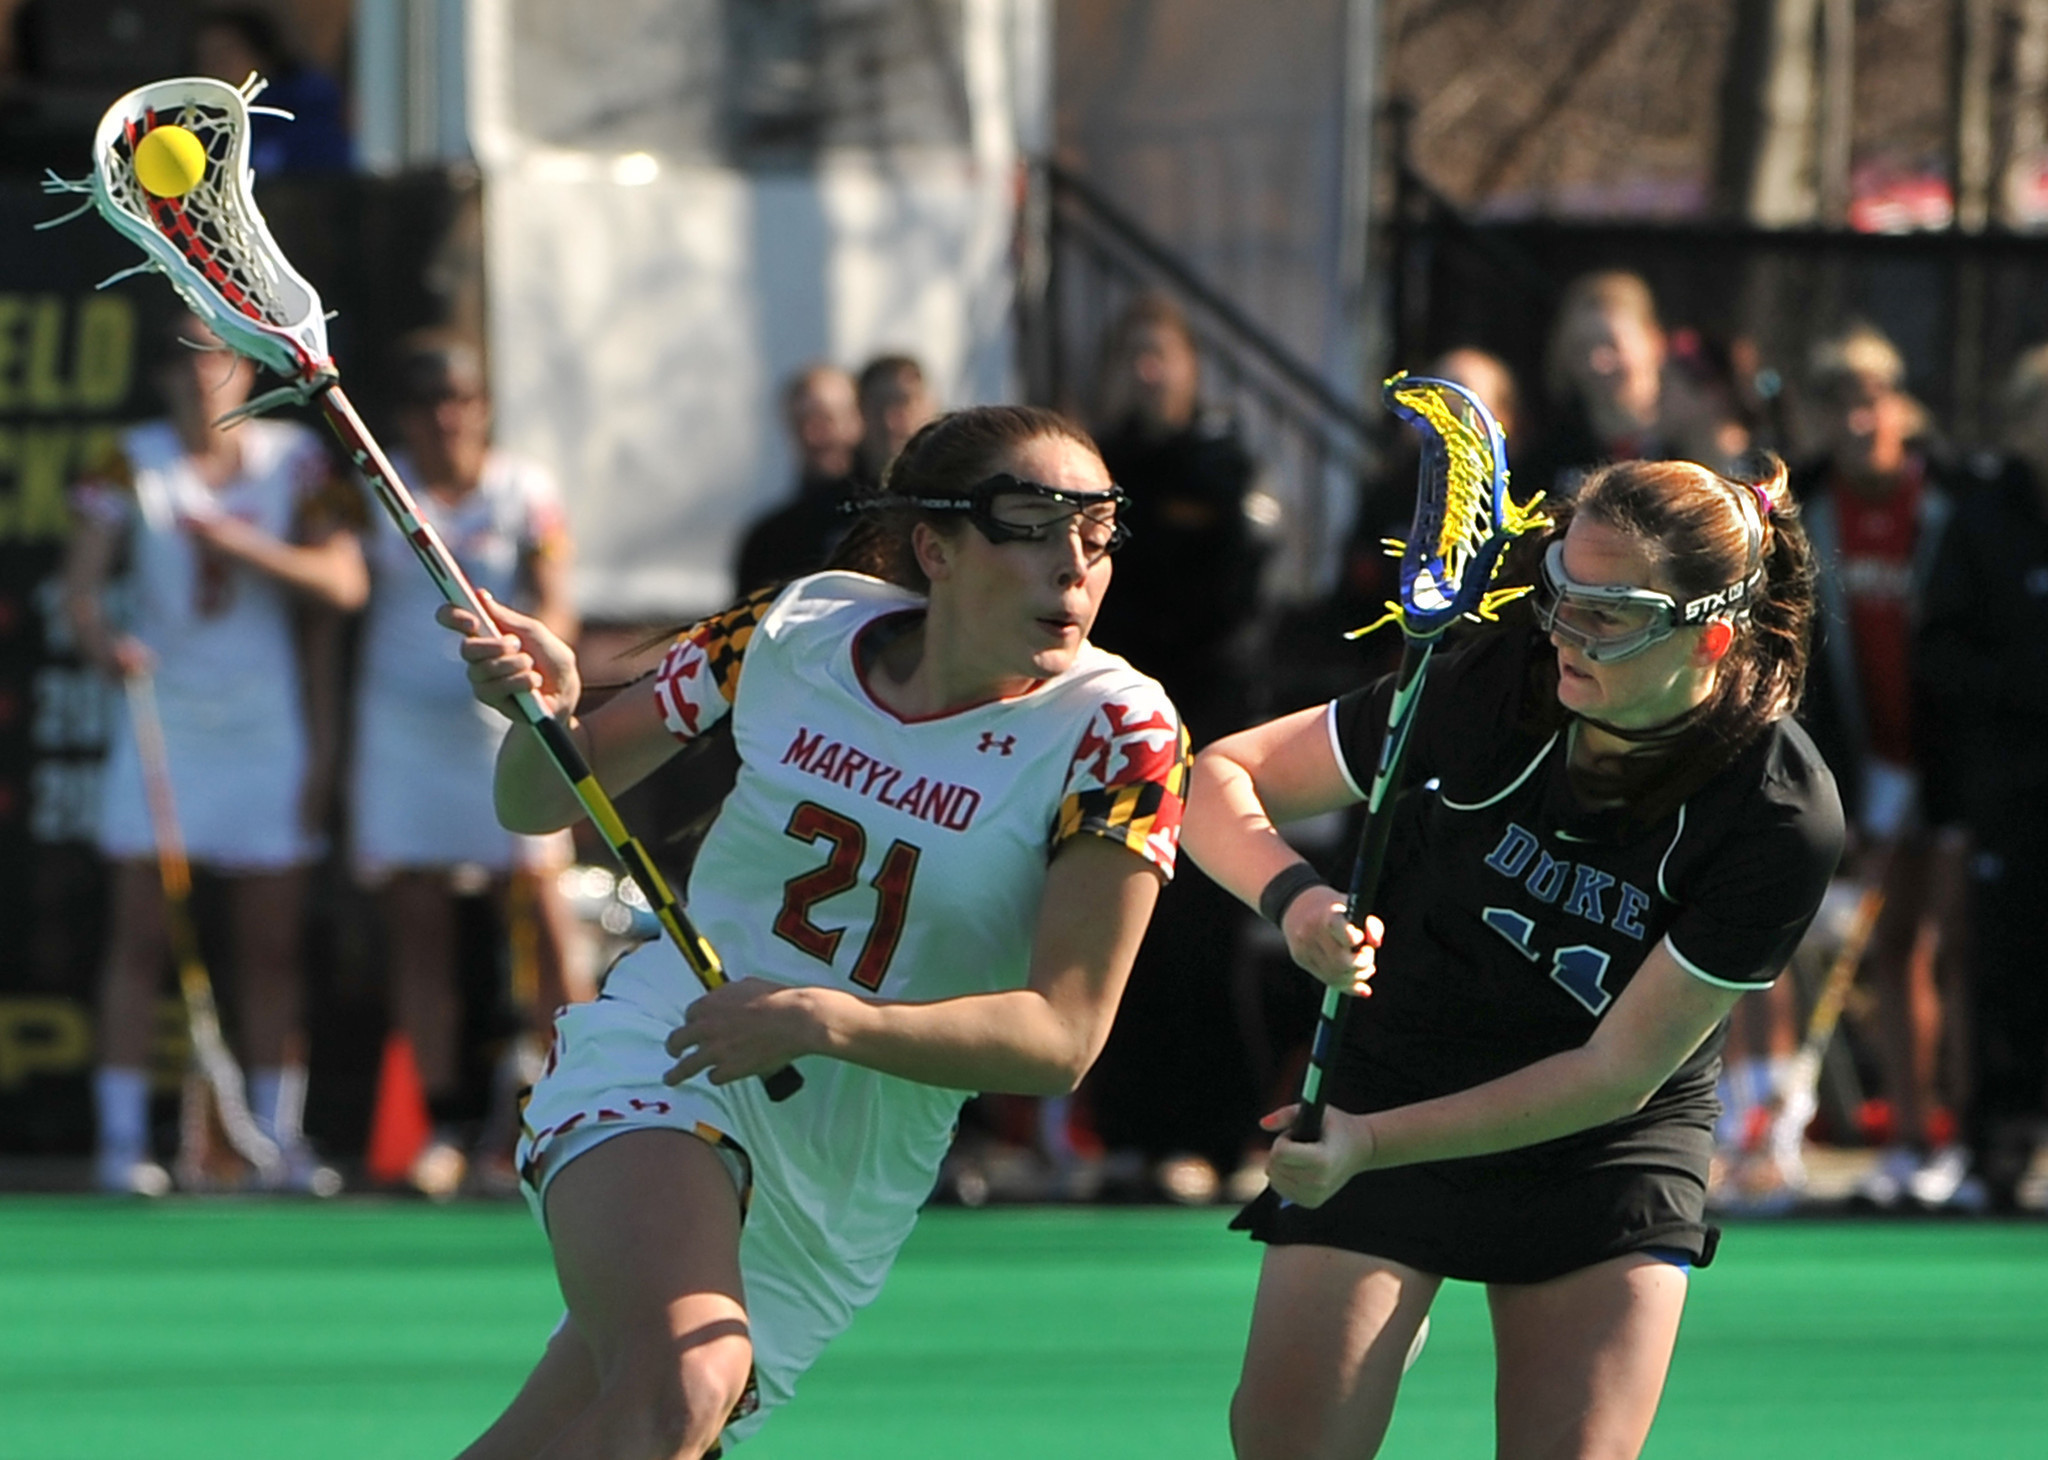 Maryland's Taylor Cummings named Big Ten Female Athlete of the Year ...